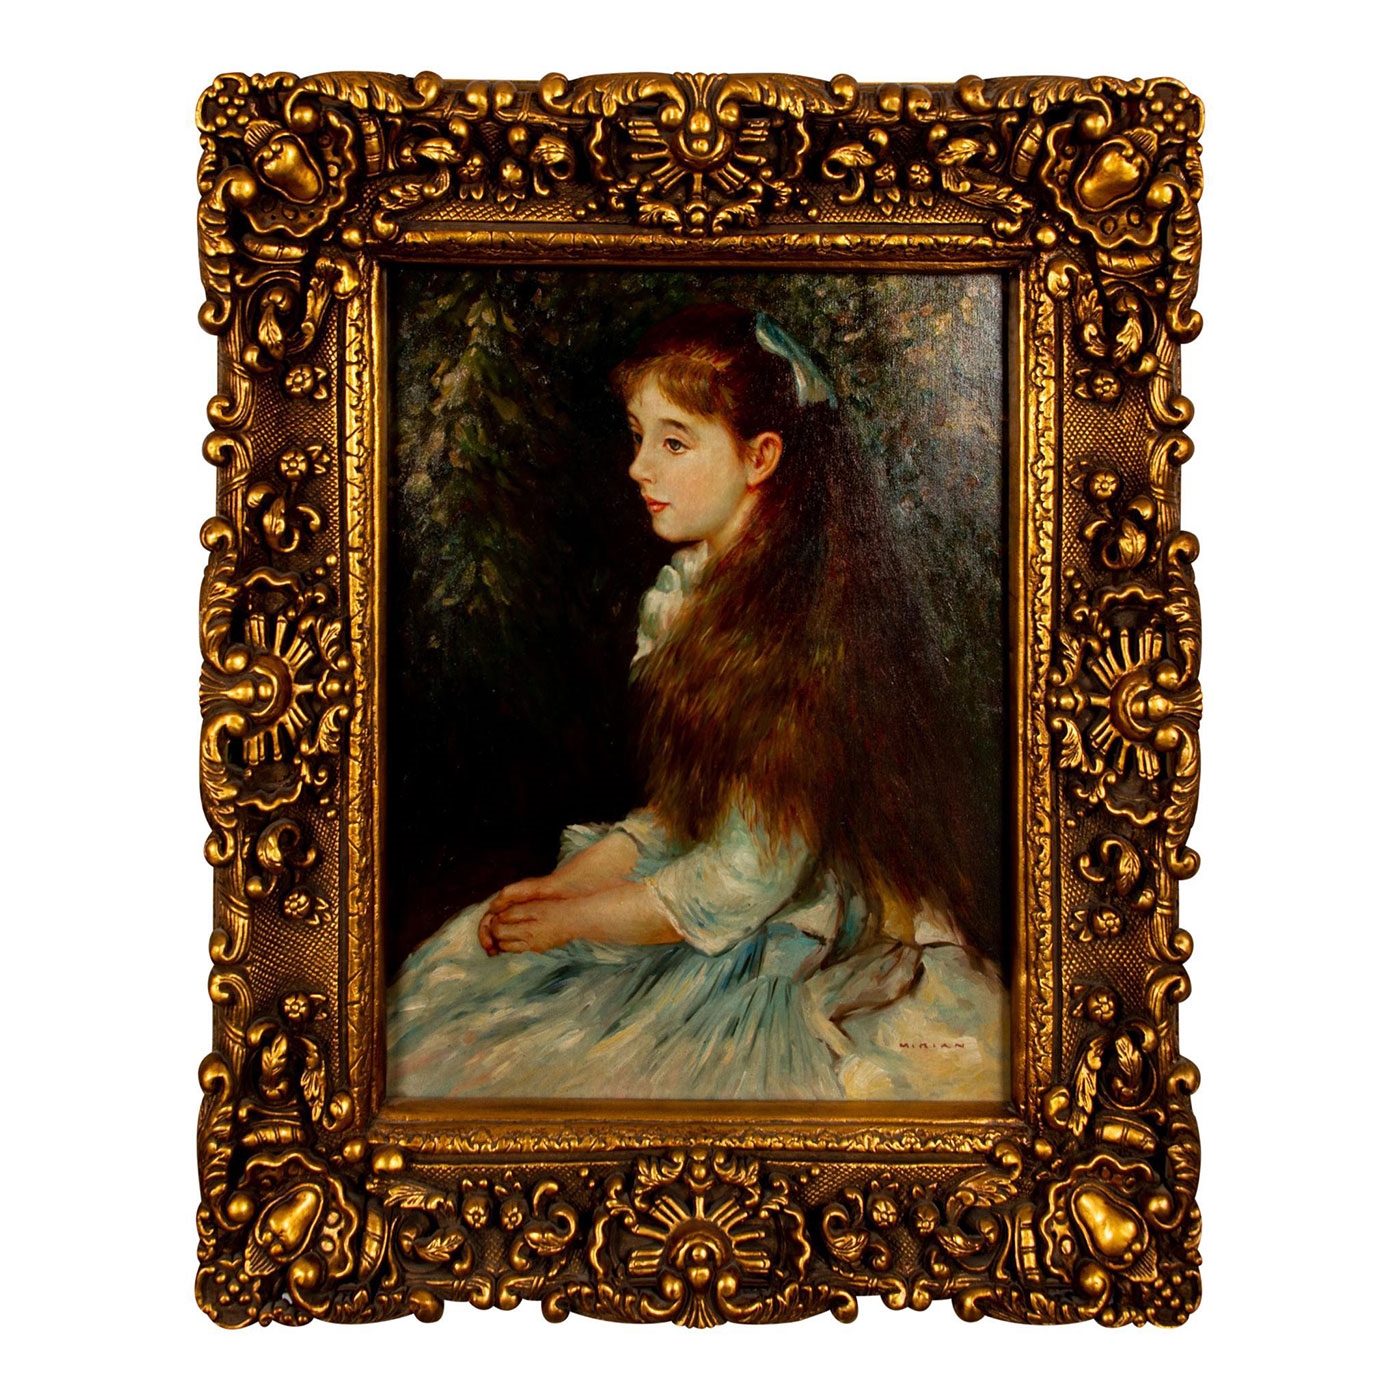 Artwork by Pierre-Auguste Renoir, Inspired by 'Portrait of Irene Cahen d'Anvers' by Renoir, Made of Oil Painting on Canvas